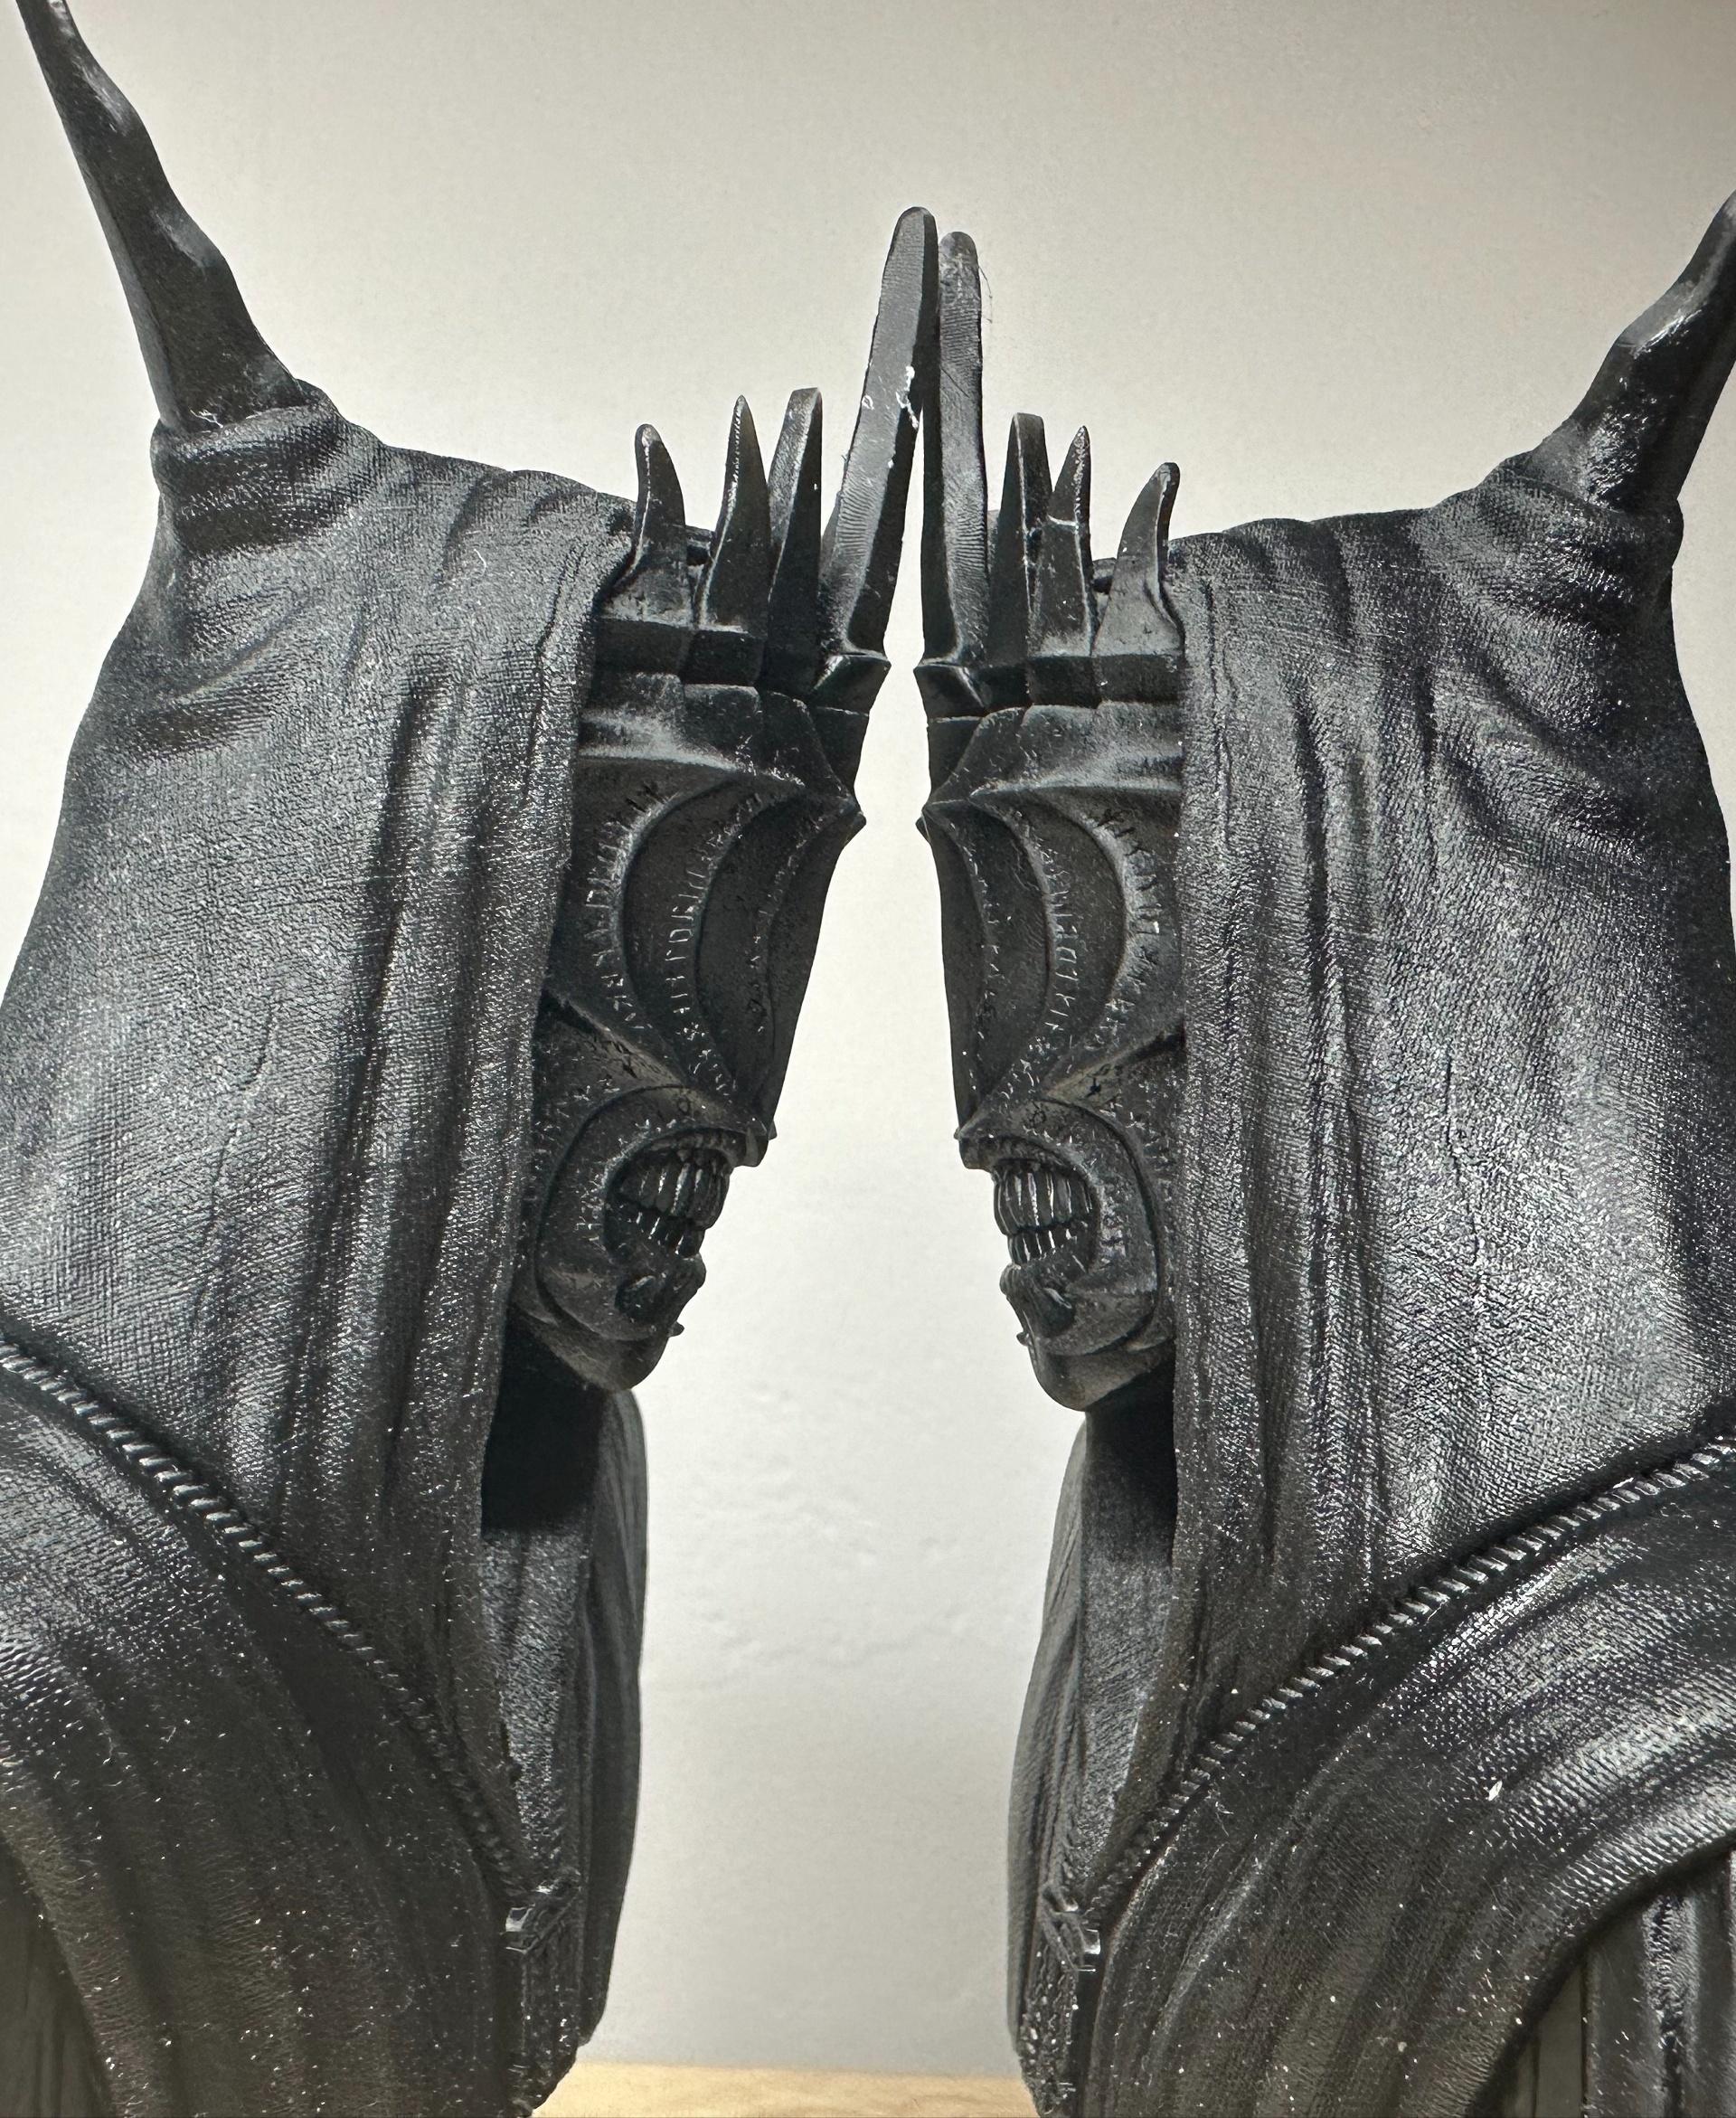 Mouth of Sauron bust (Pre-Supported) - Printer: Anycubic Photon Mono X 6Ks
Resin: ABS-Like Resin Pro 2 (black) - 3d model